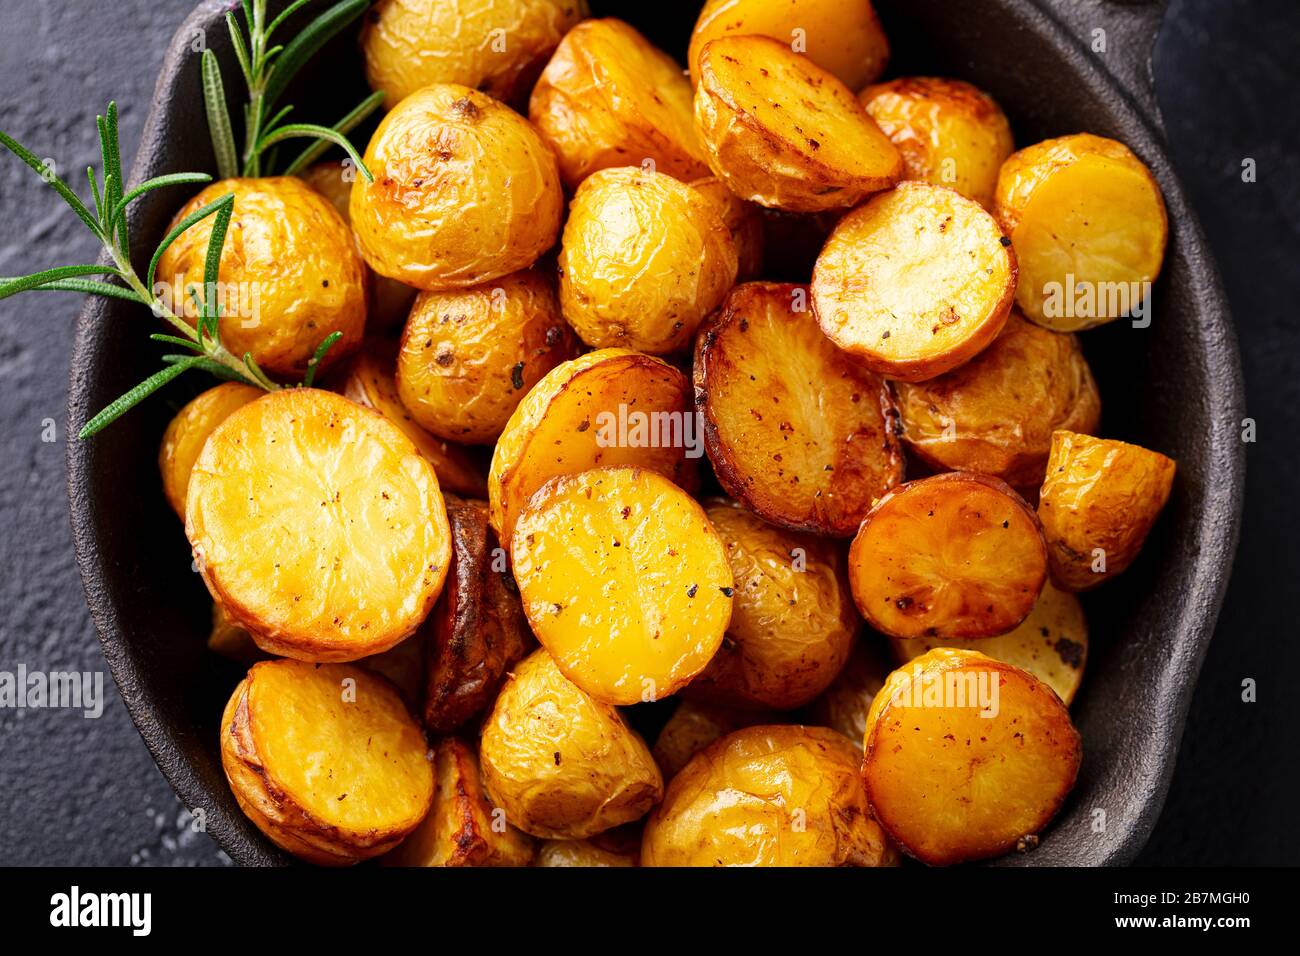 Roasted baby potatoes in iron skillet. Dark background. Close up. Stock Photo